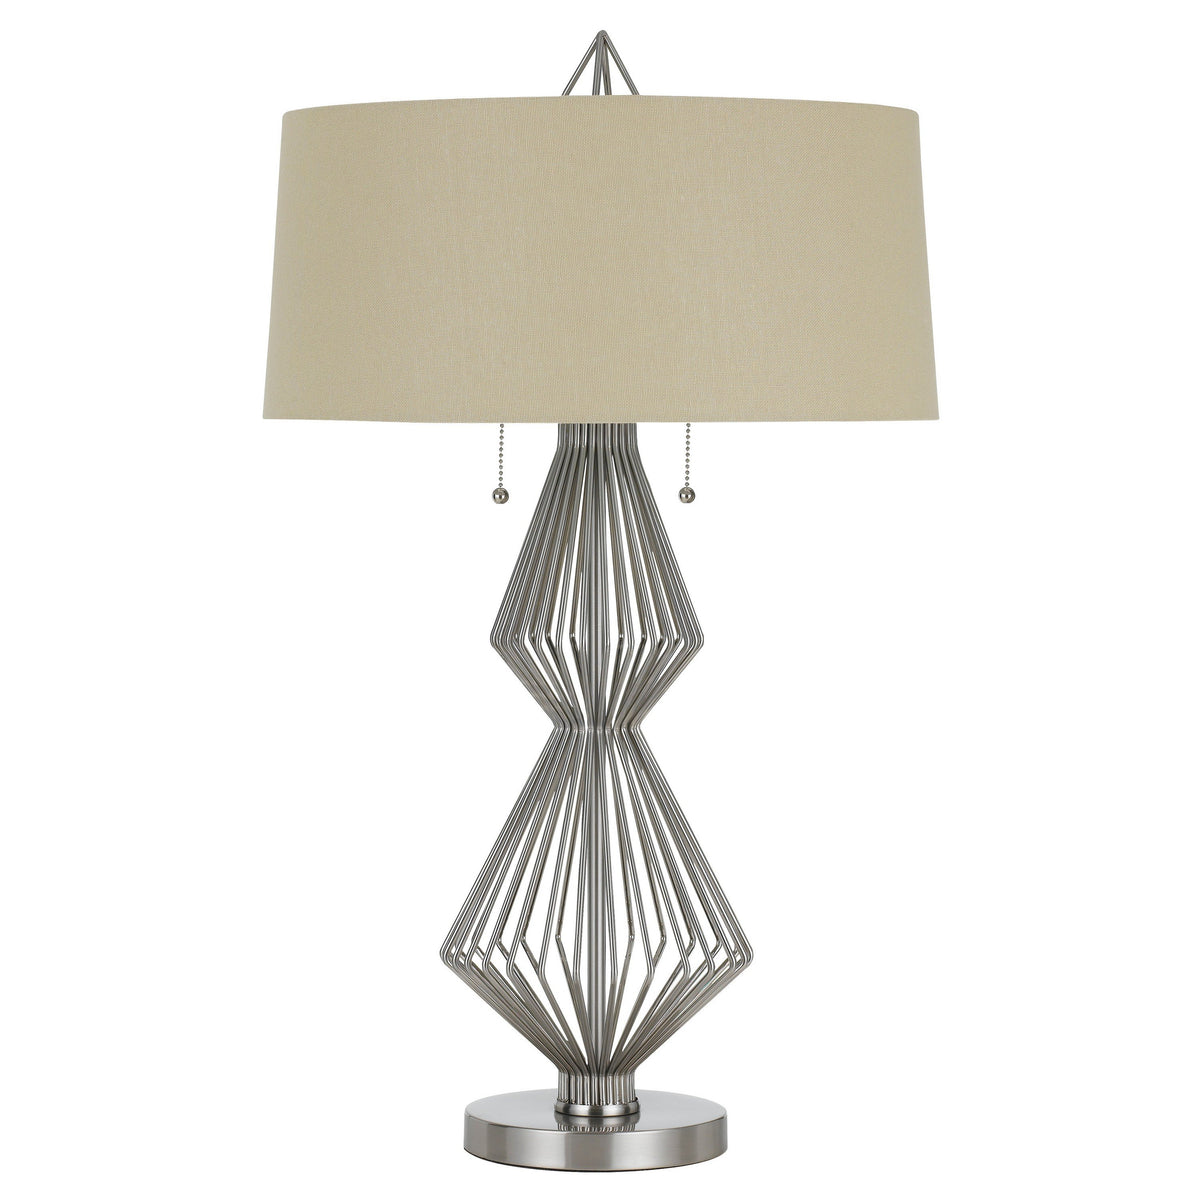 Geometric Body Metal Table Lamp with Fabric Drum Shade, Silver and Beige - BM224921